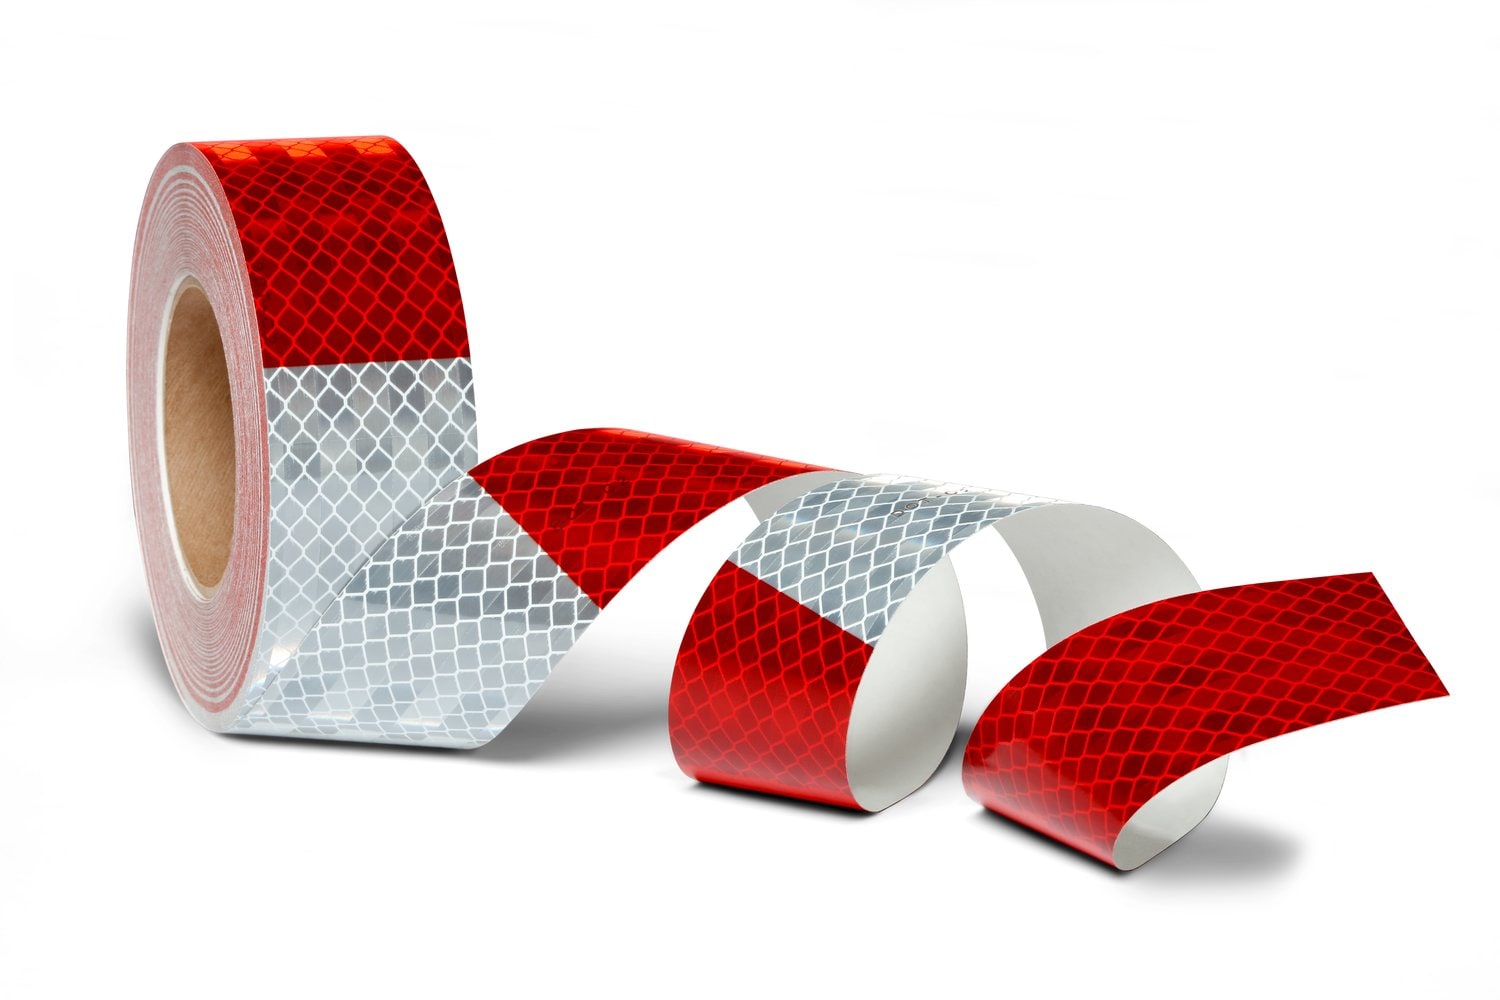 7100122481 - 3M Flexible Prismatic Conspicuity Markings 913-32 Red/White, DOT,
Configurable Roll